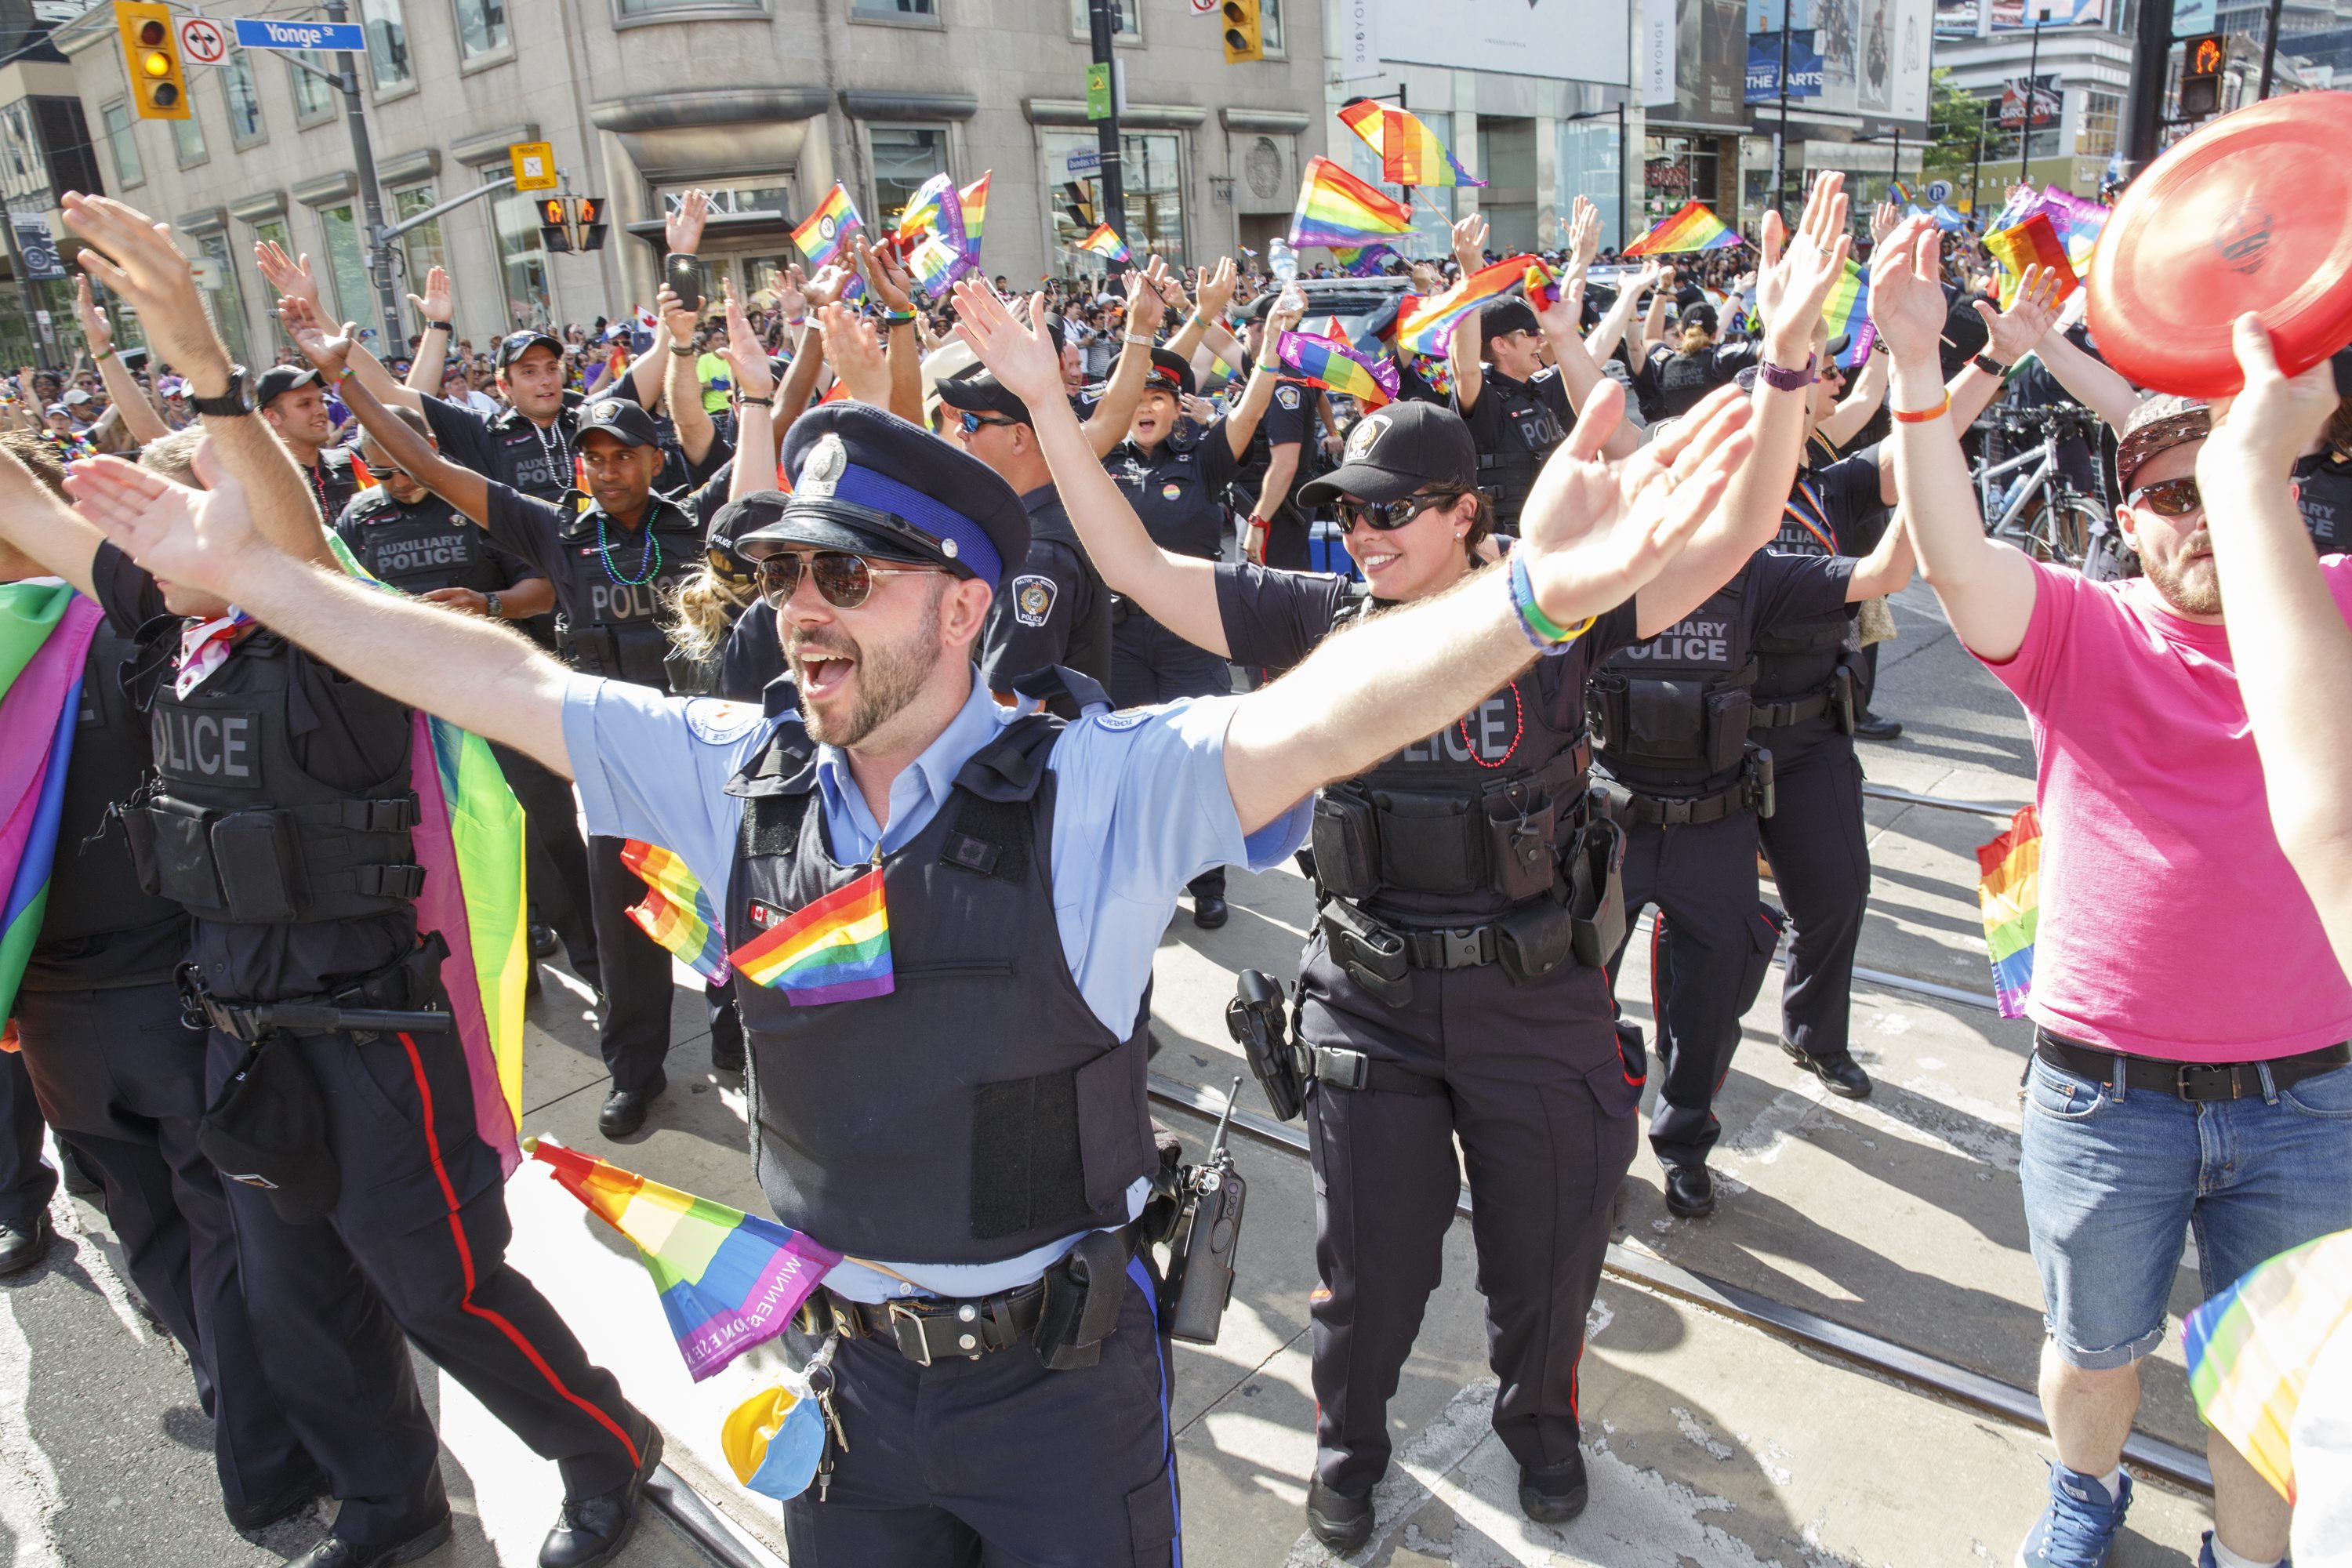 Pride Toronto S Ban On Police Floats At The Request Of Black Lives Matter Exposes Division